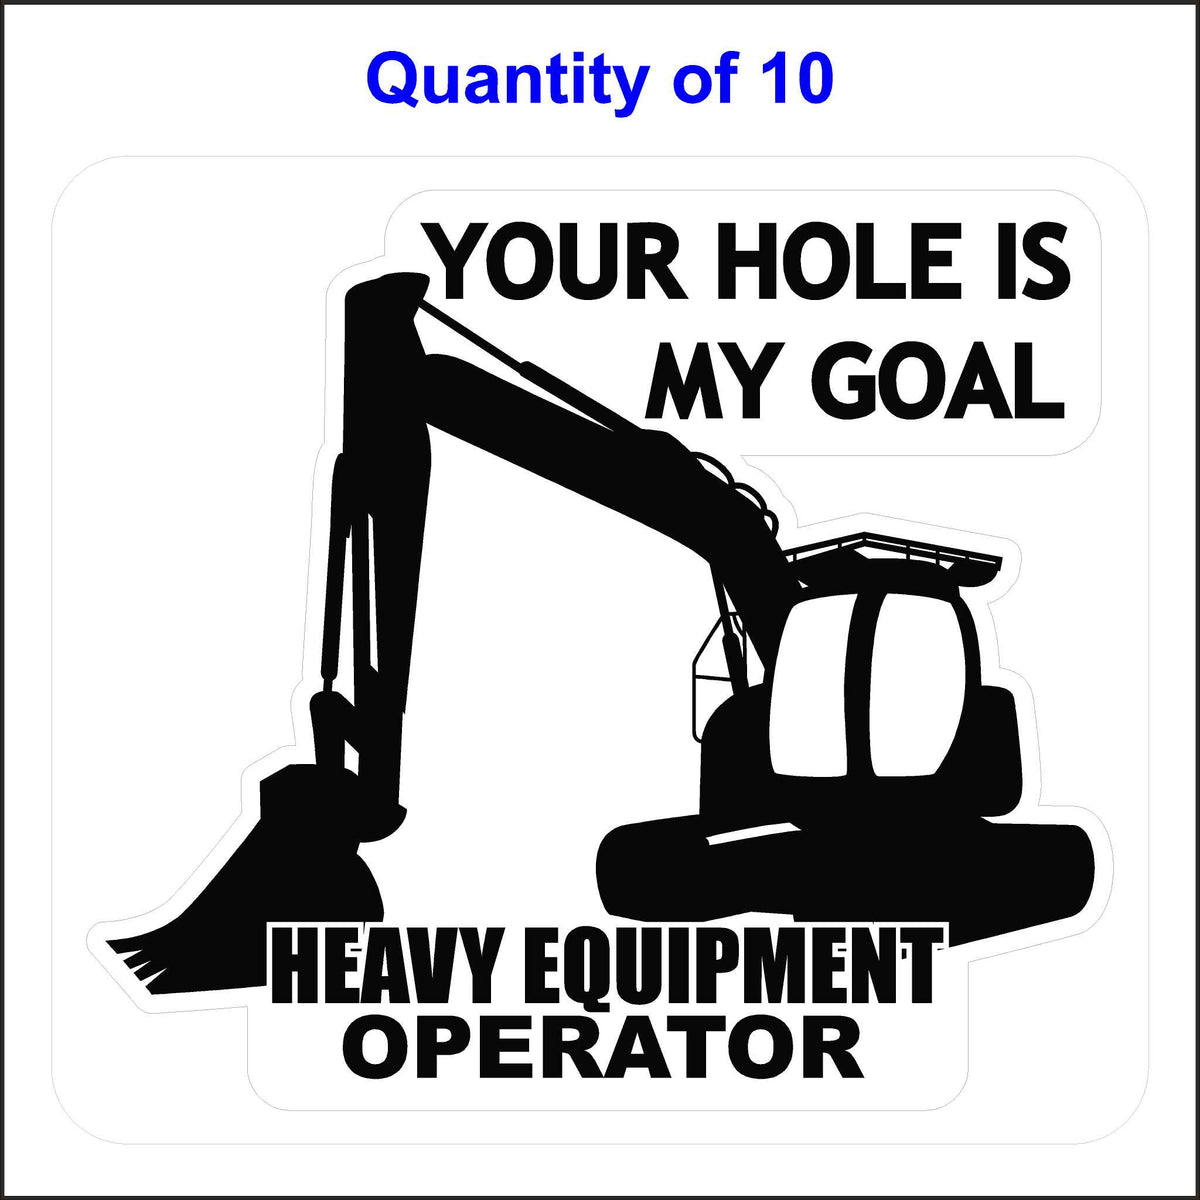 Heavy Equipment Operator Sticker. Your Hole Is My Goal Sticker. 10 Quantity.